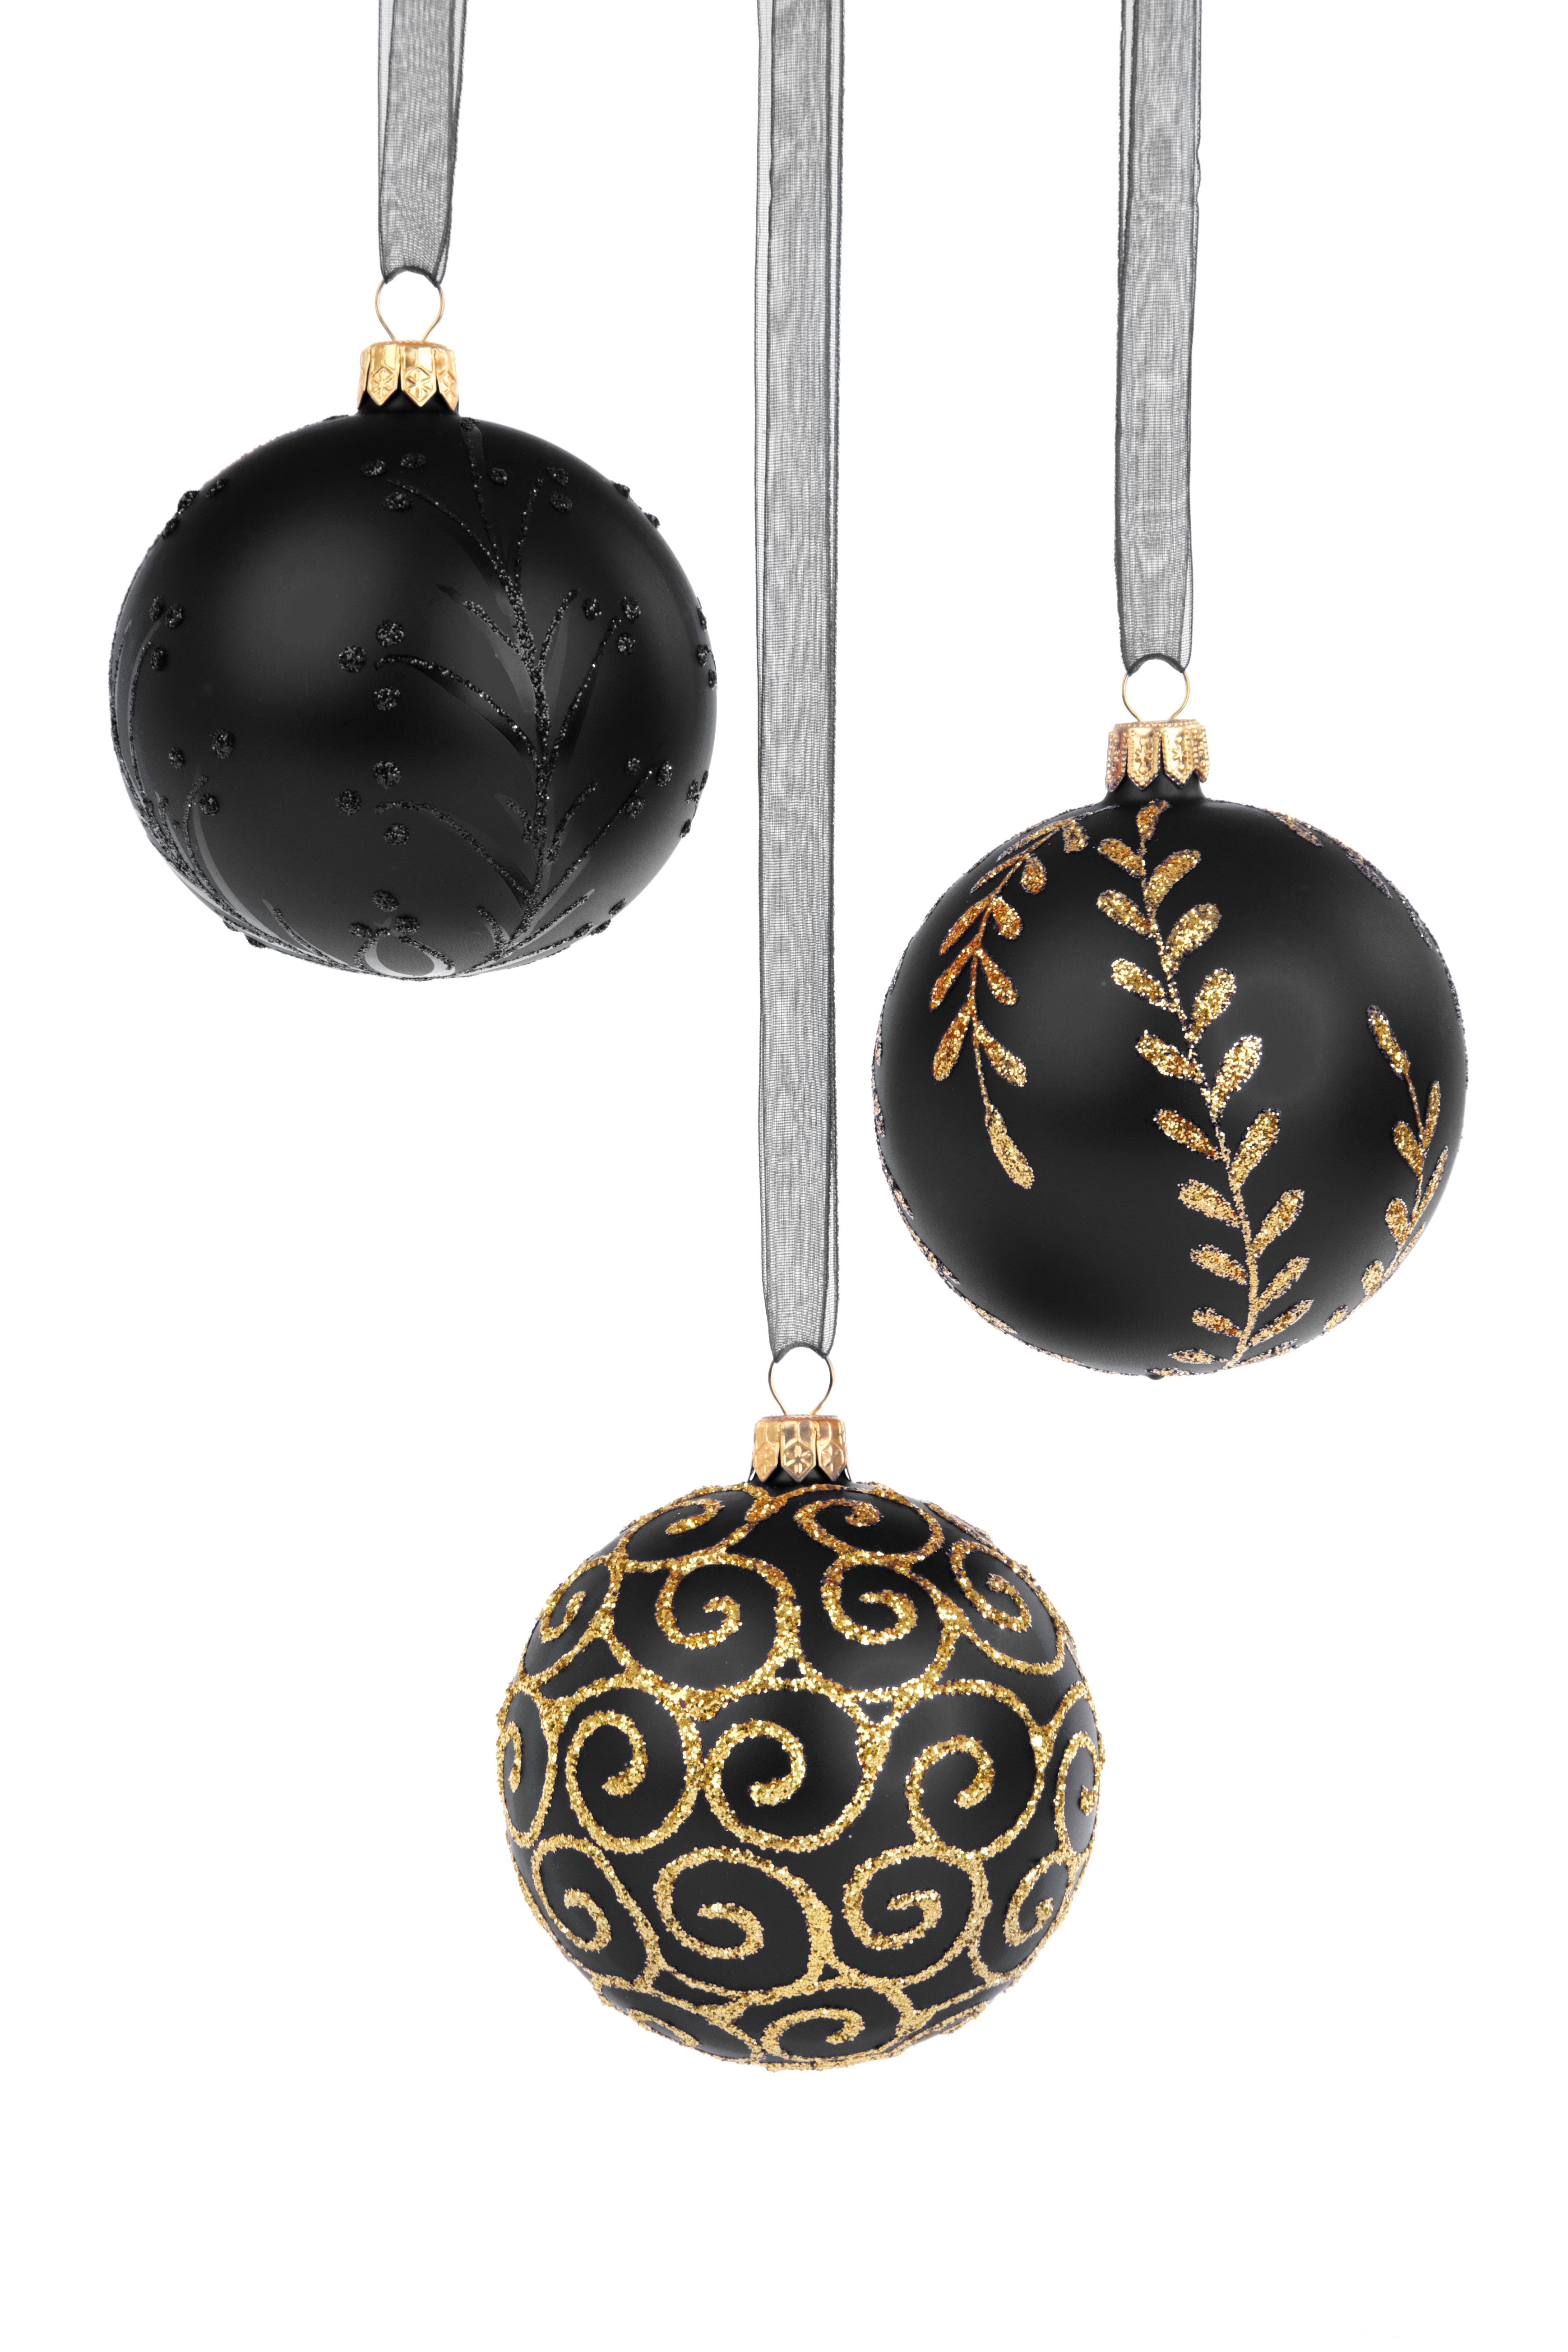 3 black and gold baubles